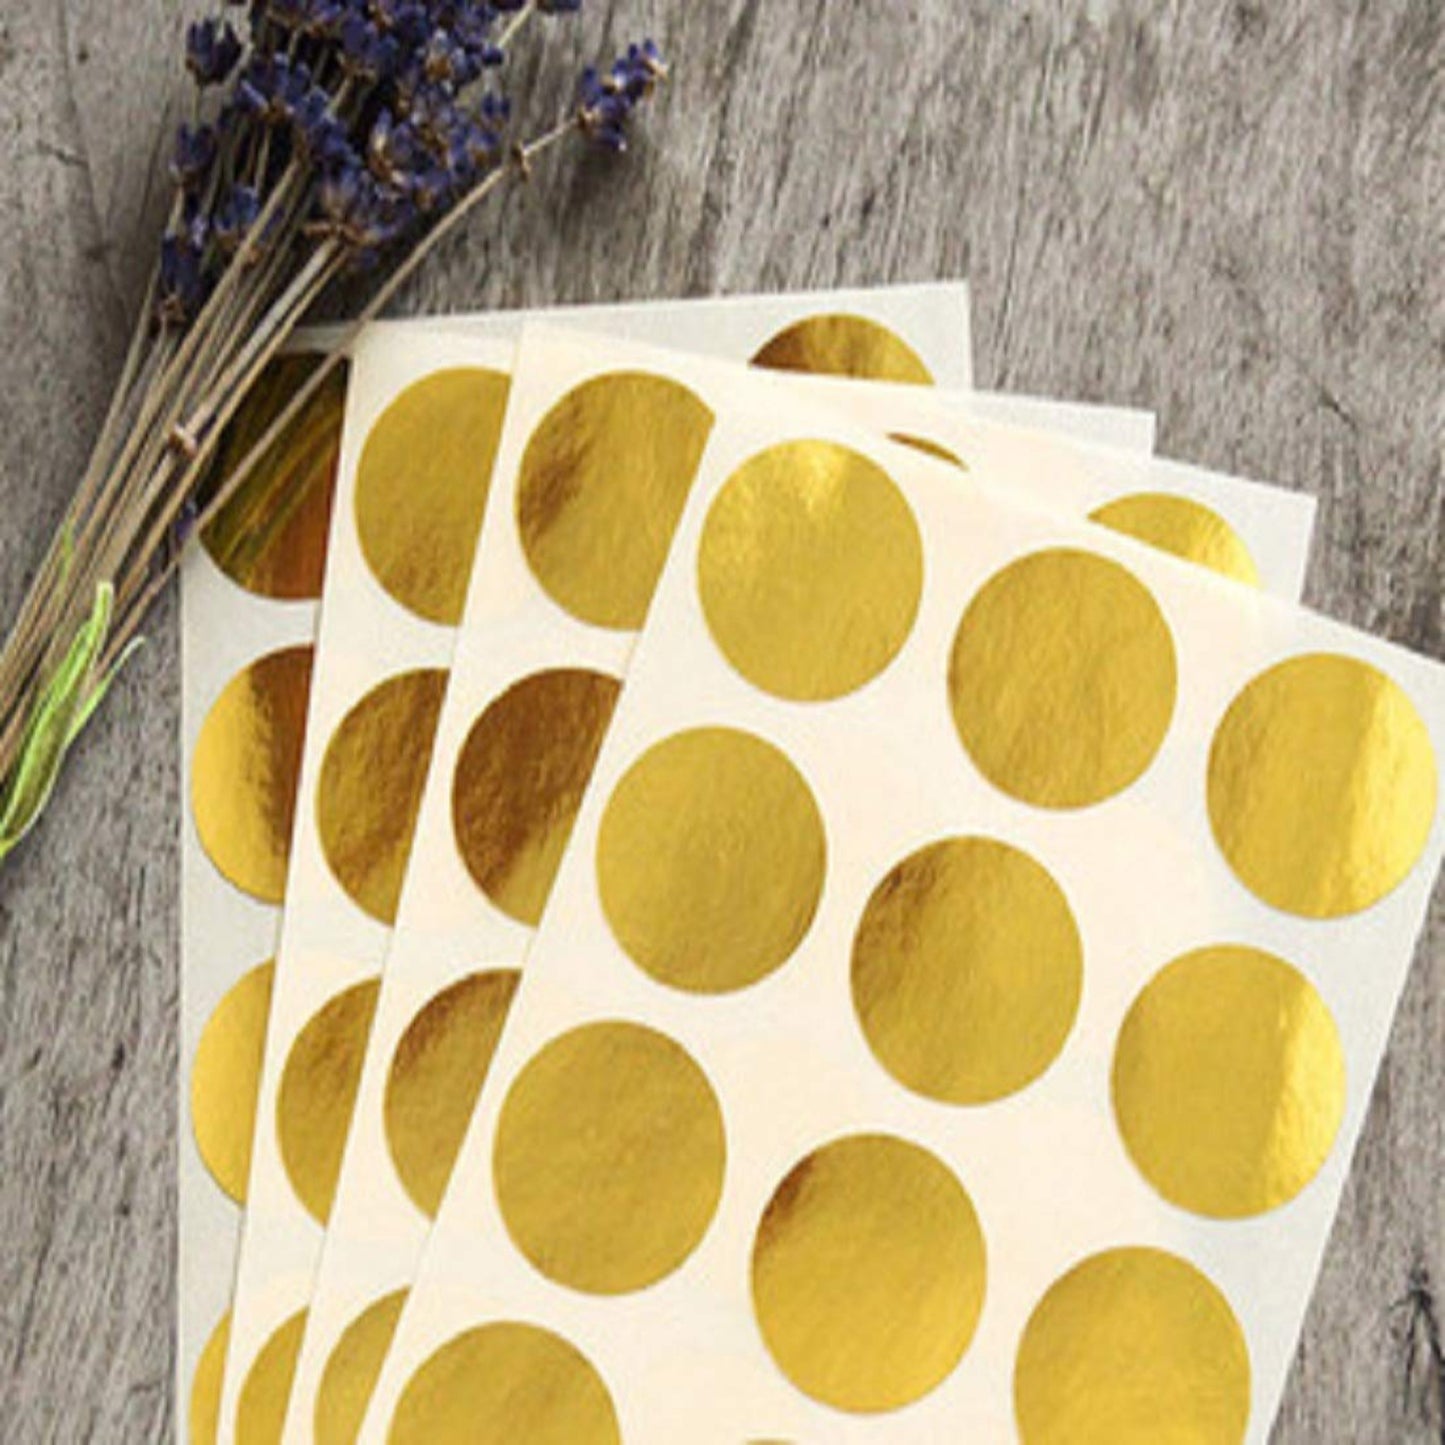 AccuPrints Gold Stickers 2.5 cm - Perfect for Envelope Closure in Invitation